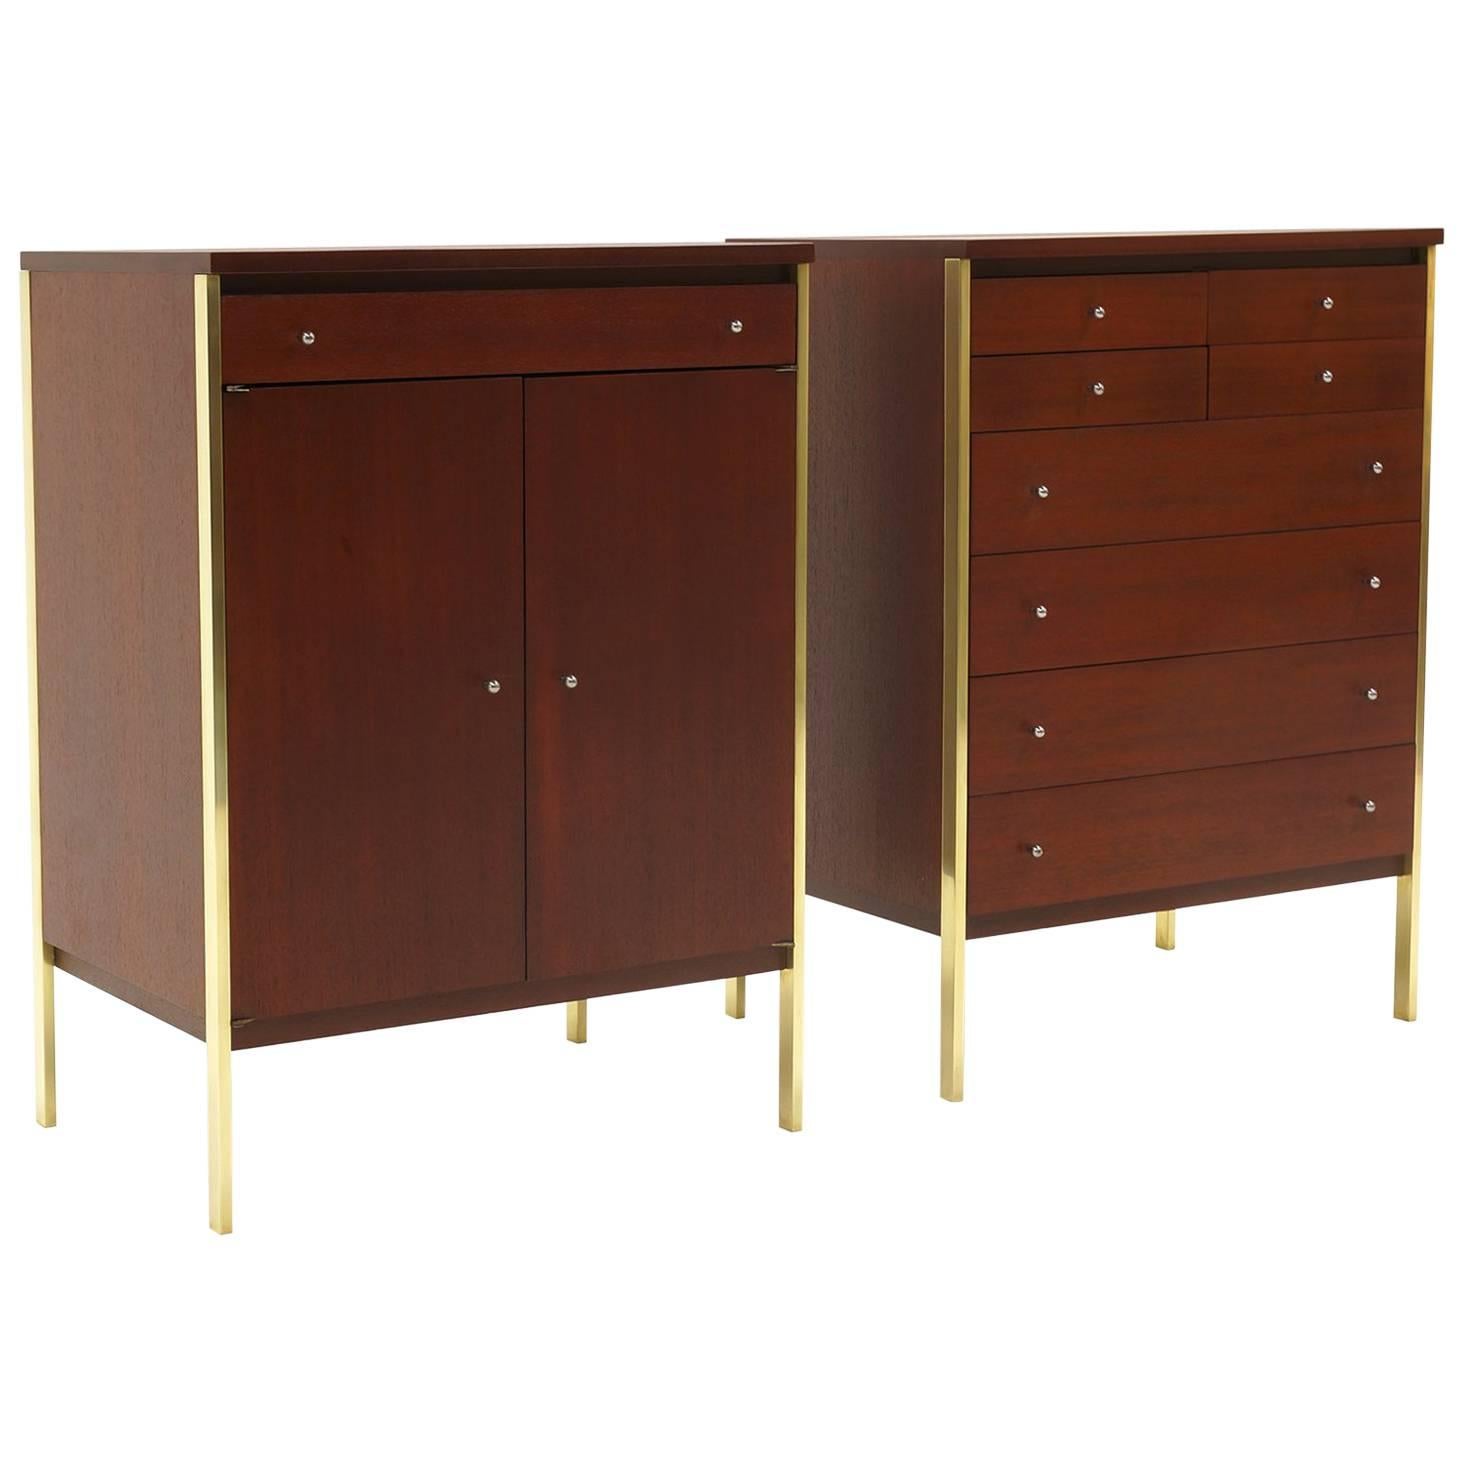 Excellent Pair of Paul McCobb Connoisseur Group Cabinets, Model 7026 and 7025